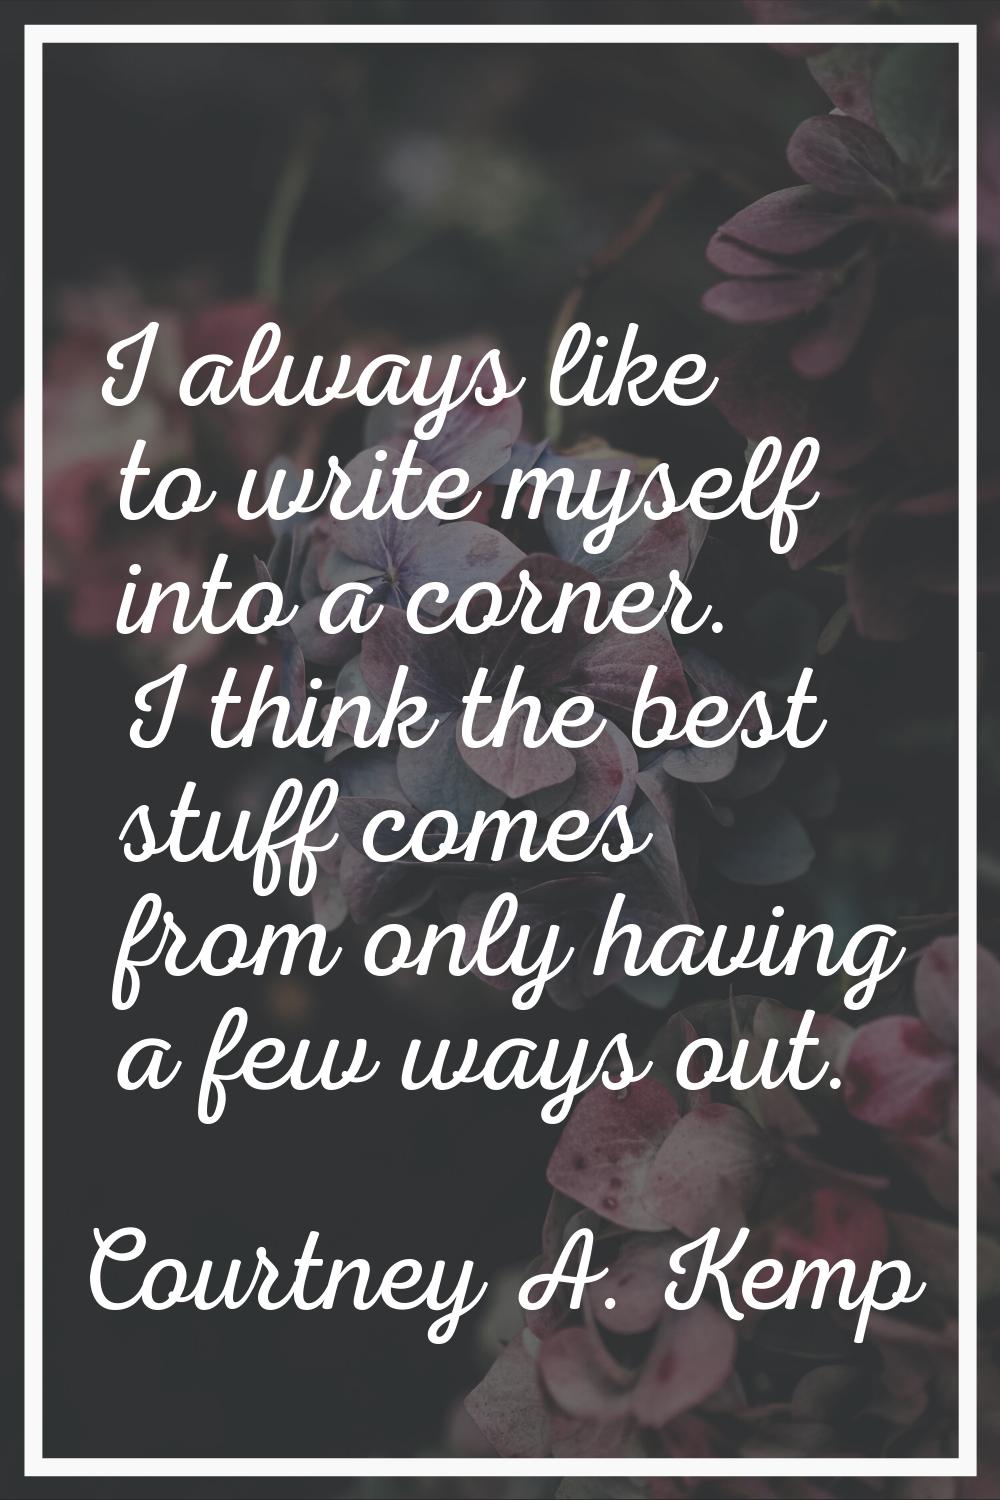 I always like to write myself into a corner. I think the best stuff comes from only having a few wa